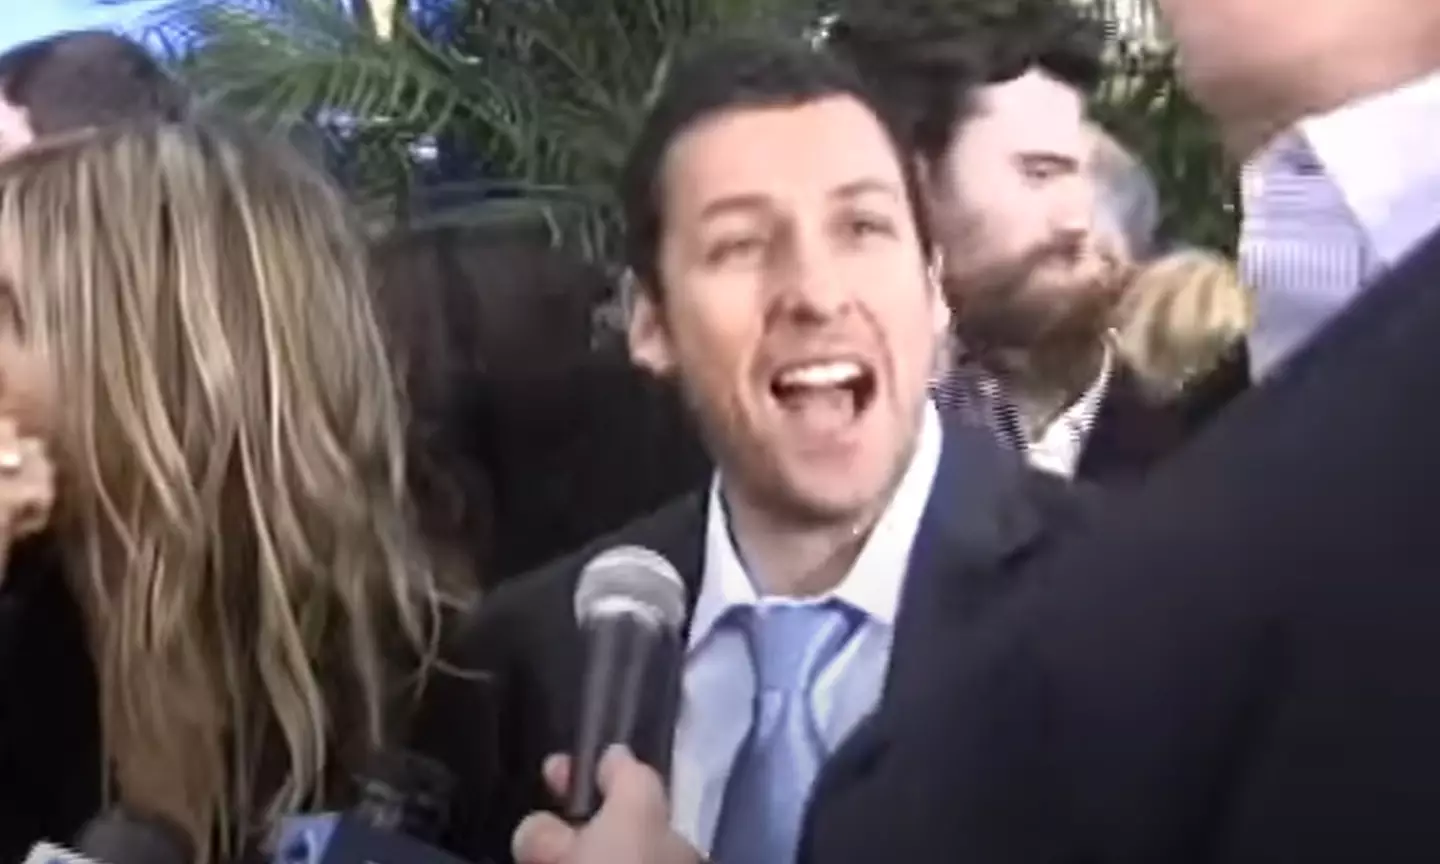 People are loving that Adam Sandler's response was to yell 'oh my god that's awful' once he realised how tall the interviewer was.